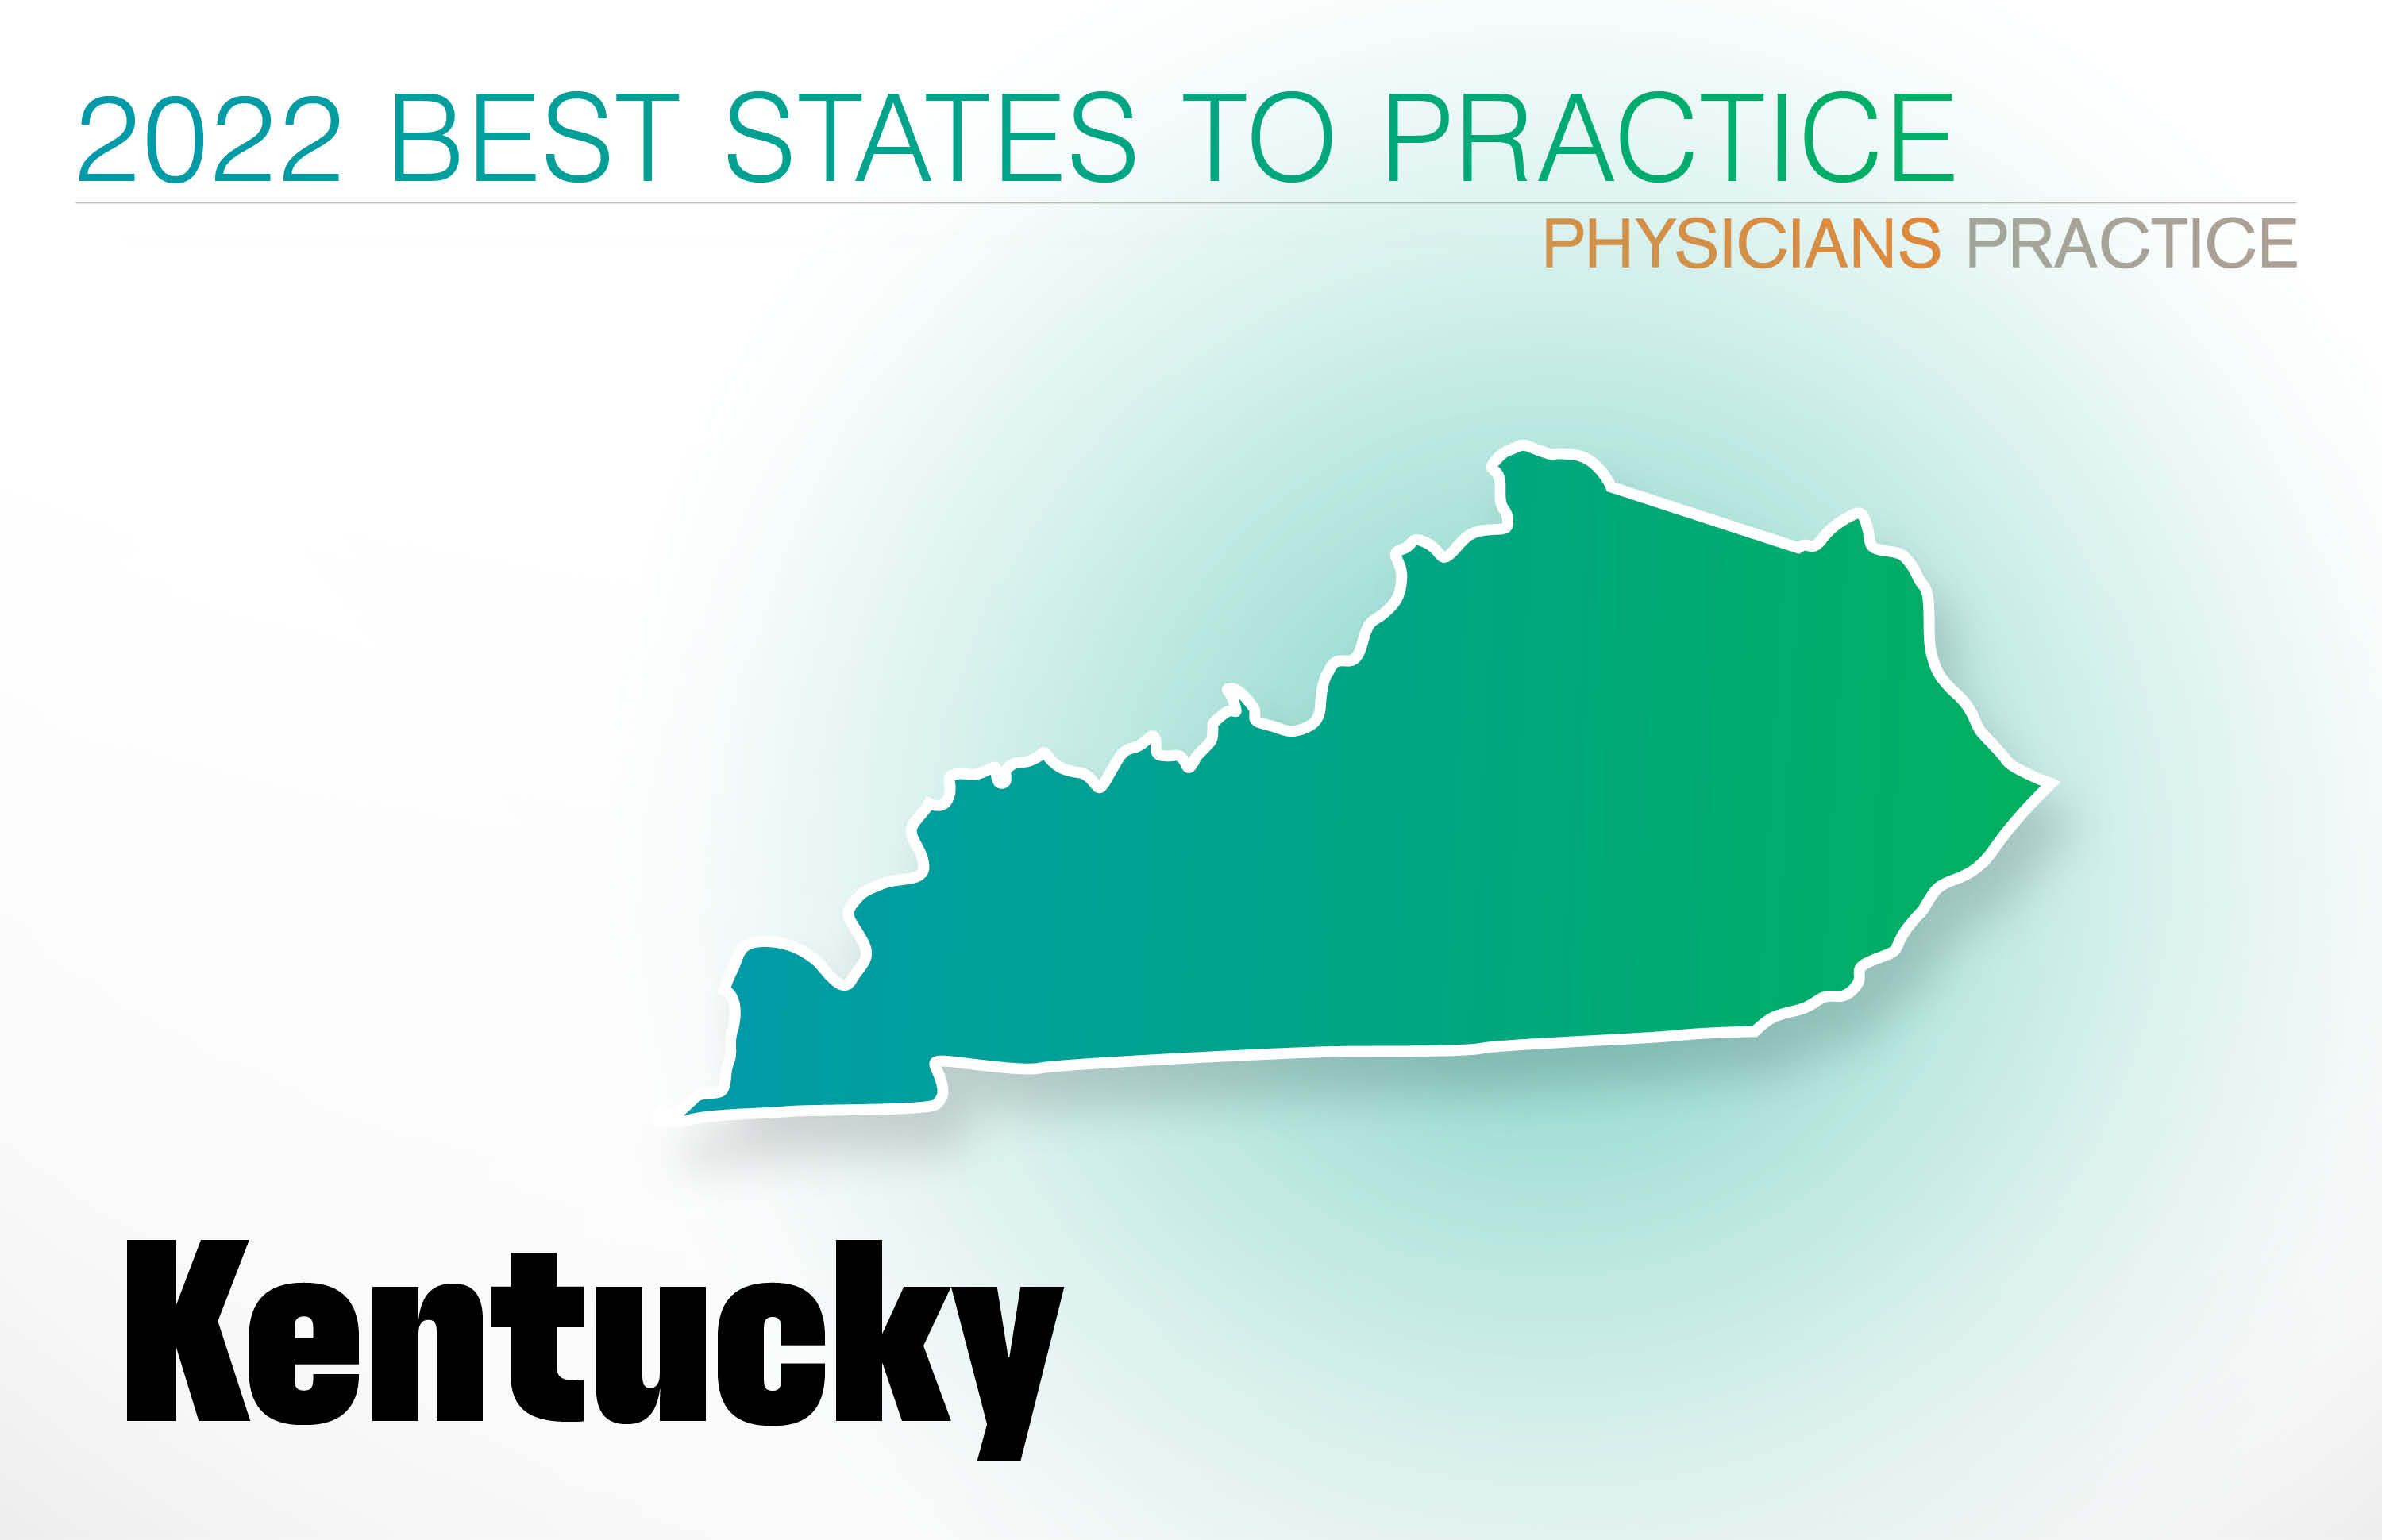 #23 Kentucky Rankings: Cost of living: 18 Physician density: 11 Amount of state business taxes collected: 18 Average malpractice insurance rates: 25 Quality of life: 47 GPCI: 19